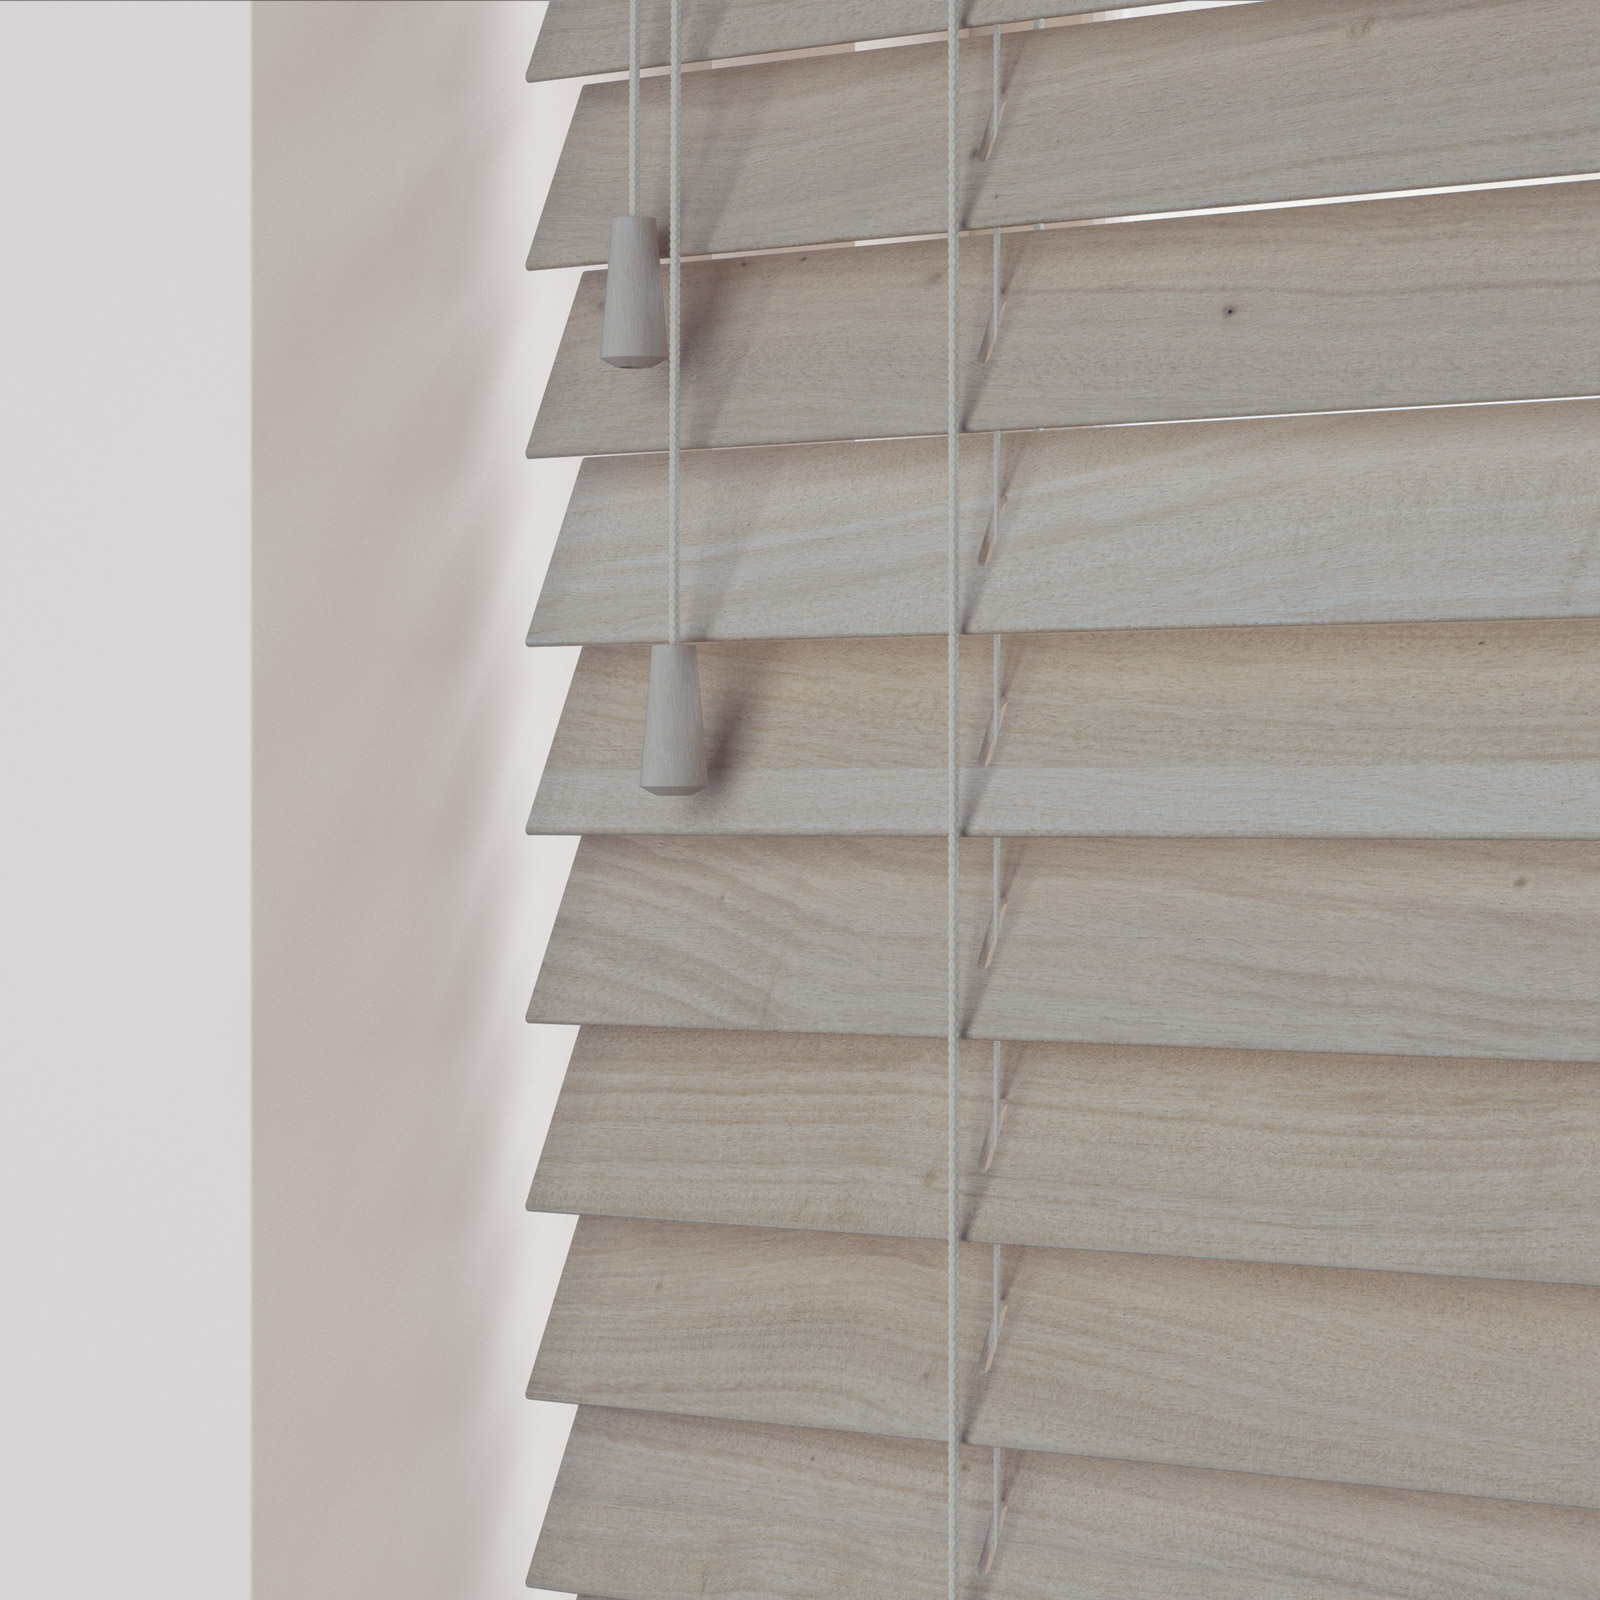 Suppliers of Wooden Venetian Blinds With 25mm Slats UK